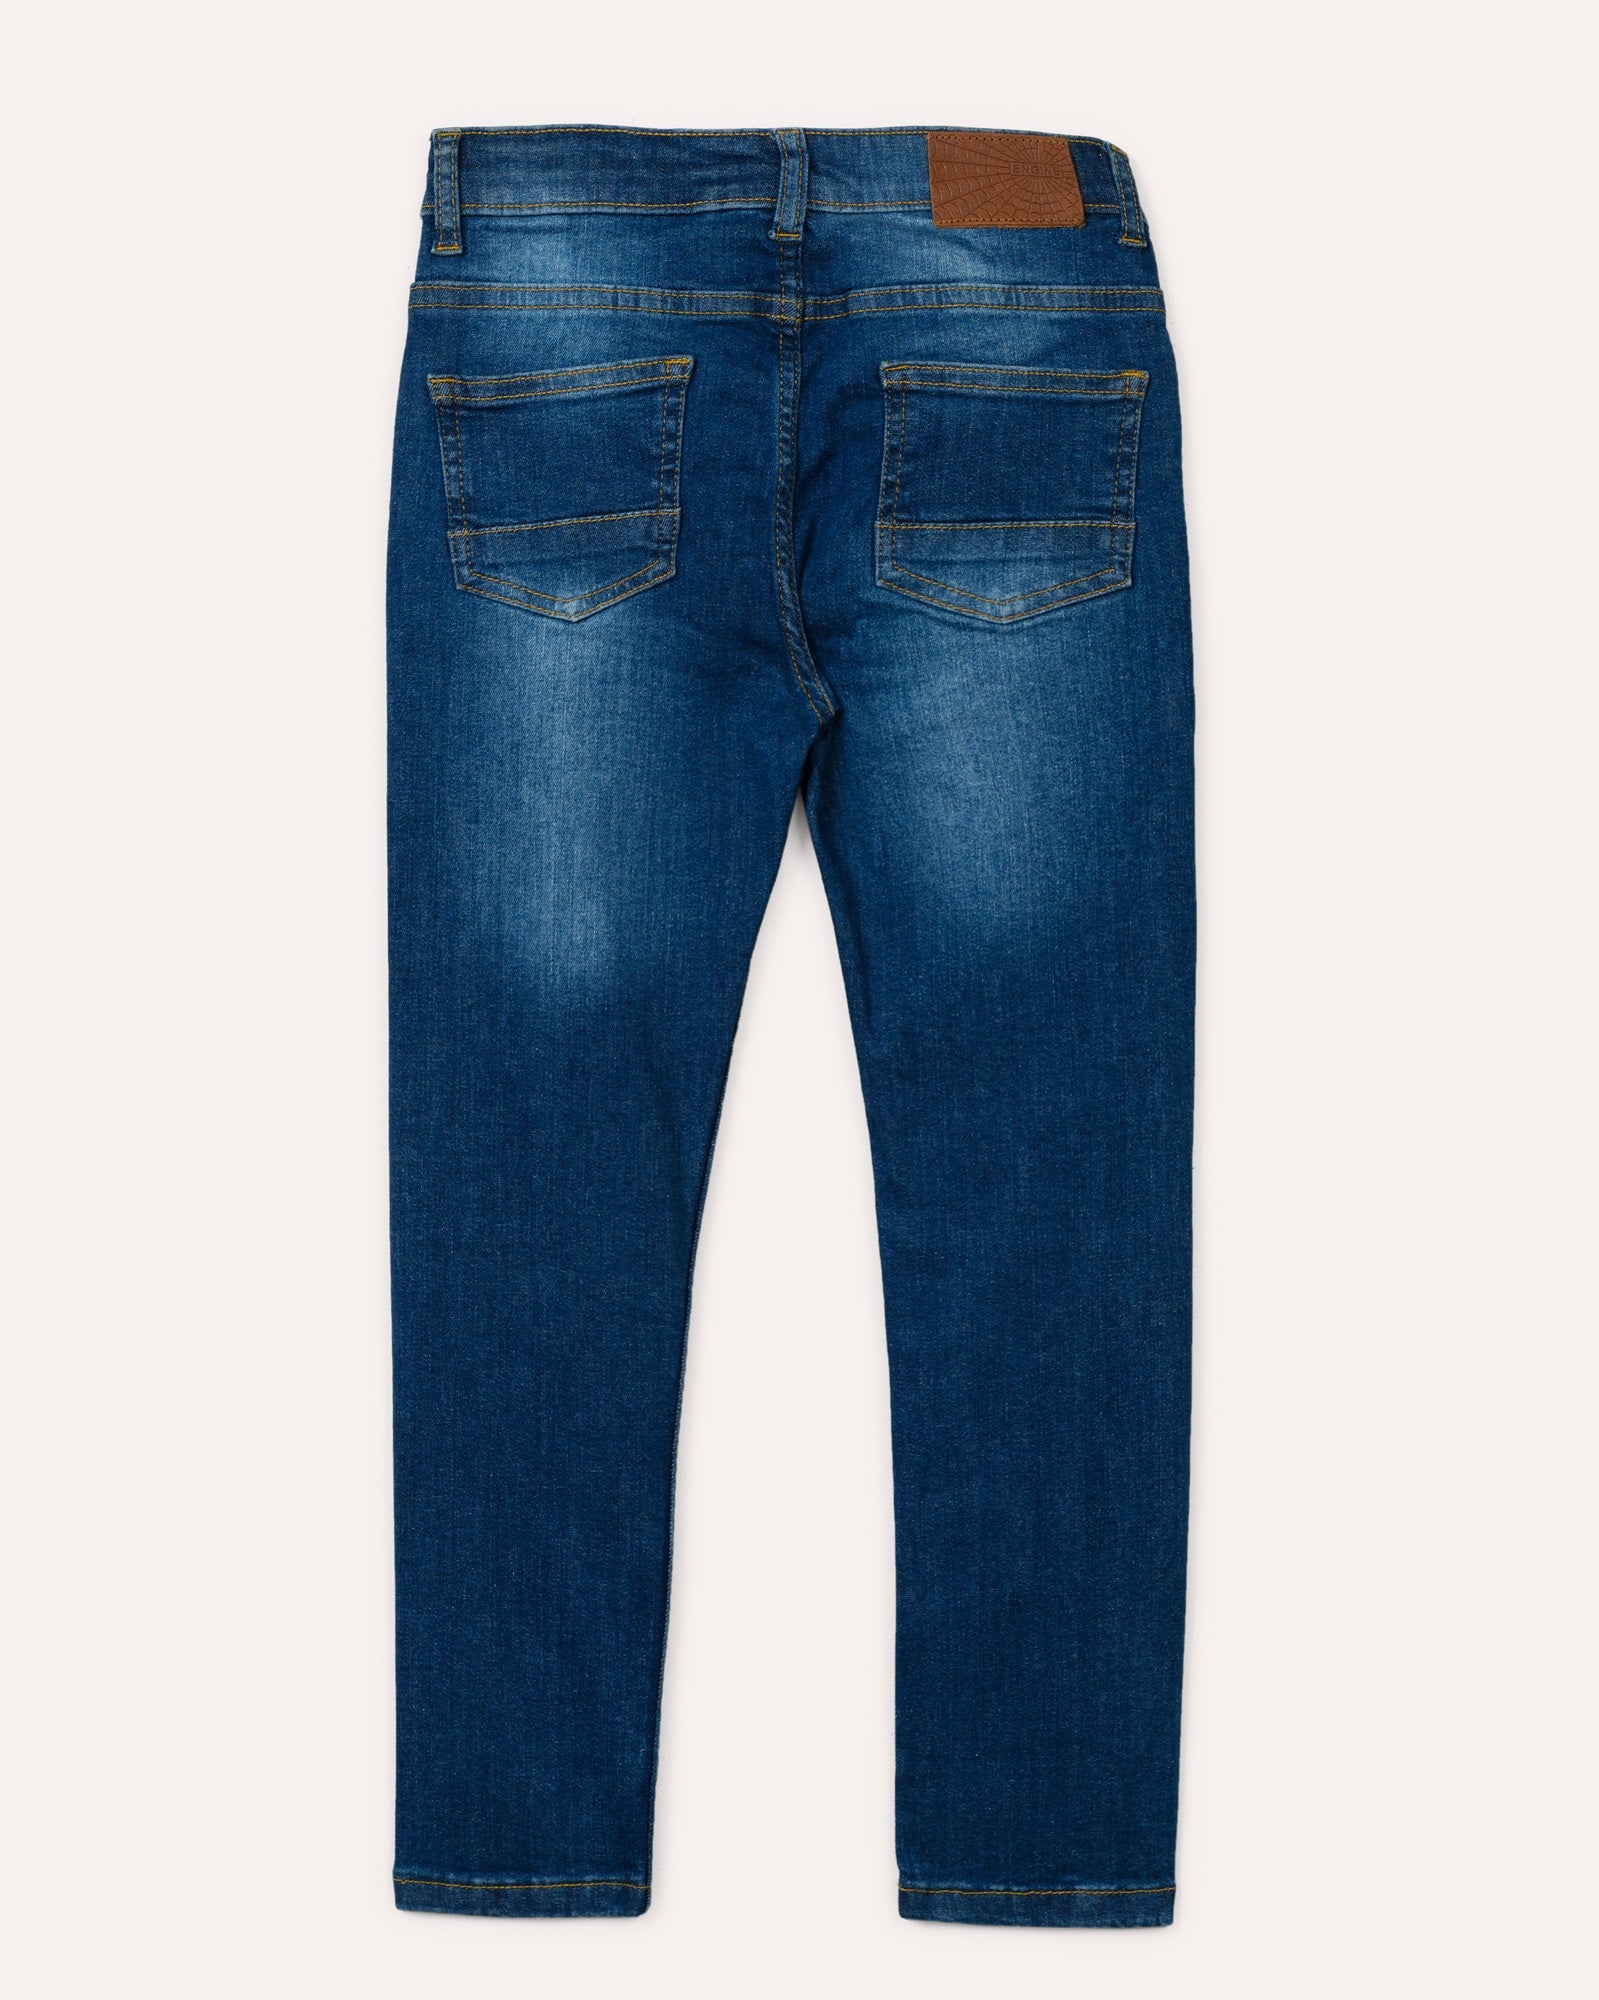 DUCOMBE 28 Inches Inseam Jeans A Classic Pocket Straight, 57% OFF